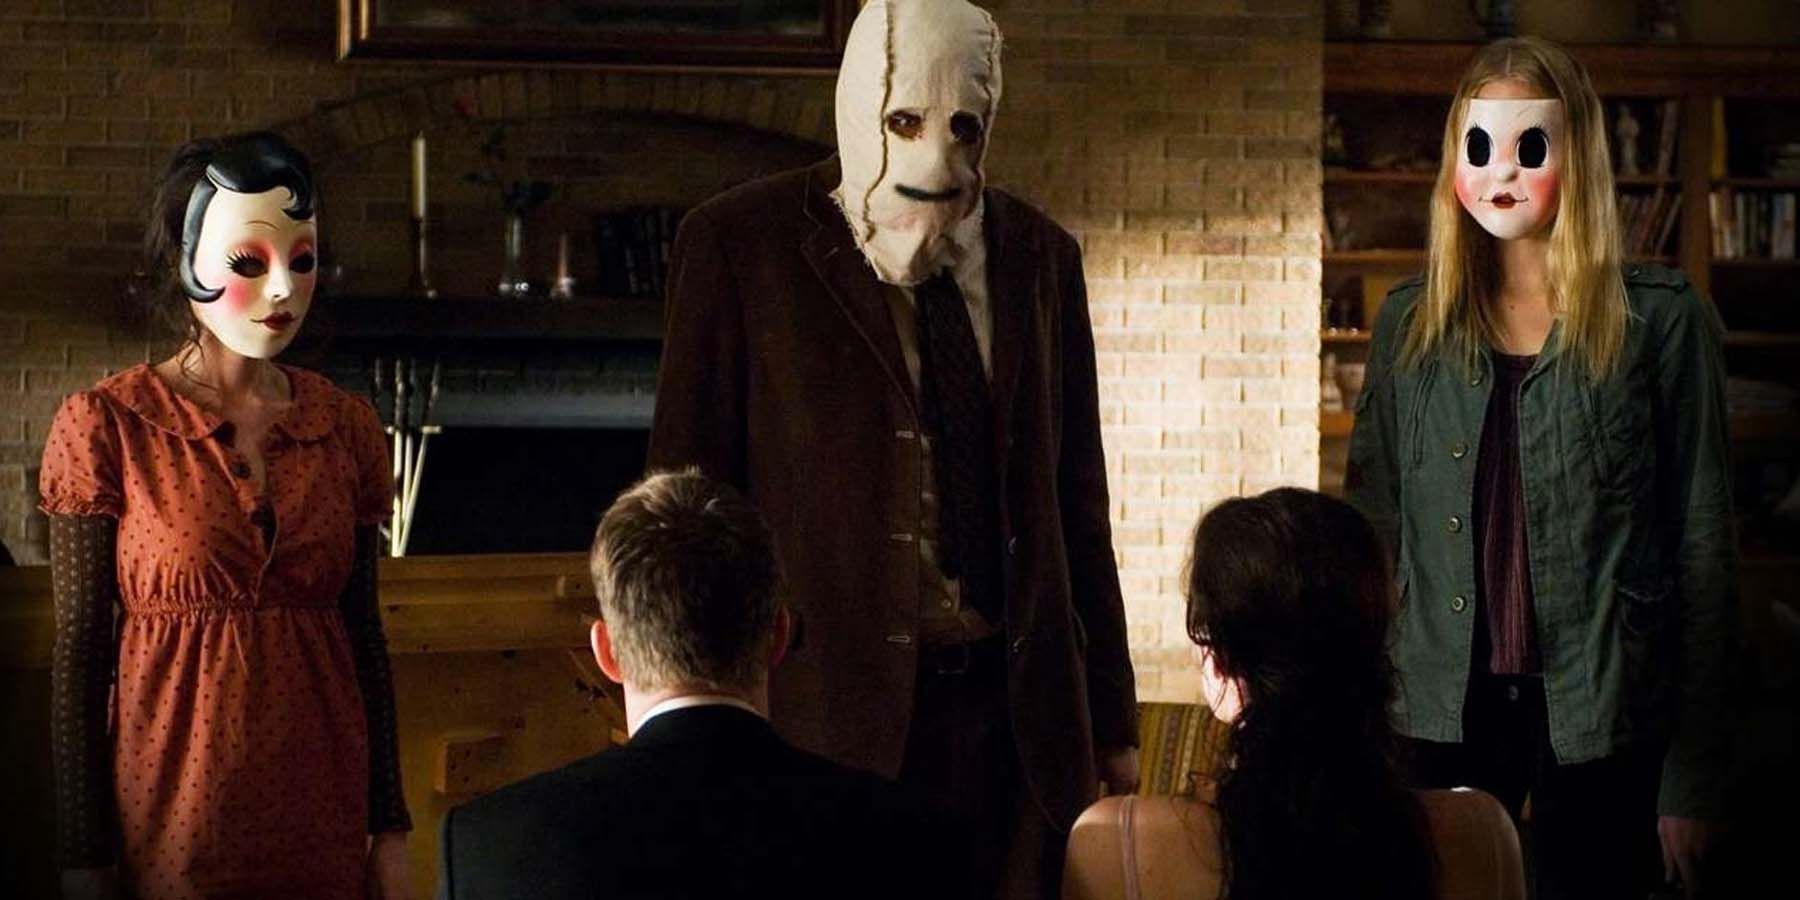 The Strangers (2008) hostages